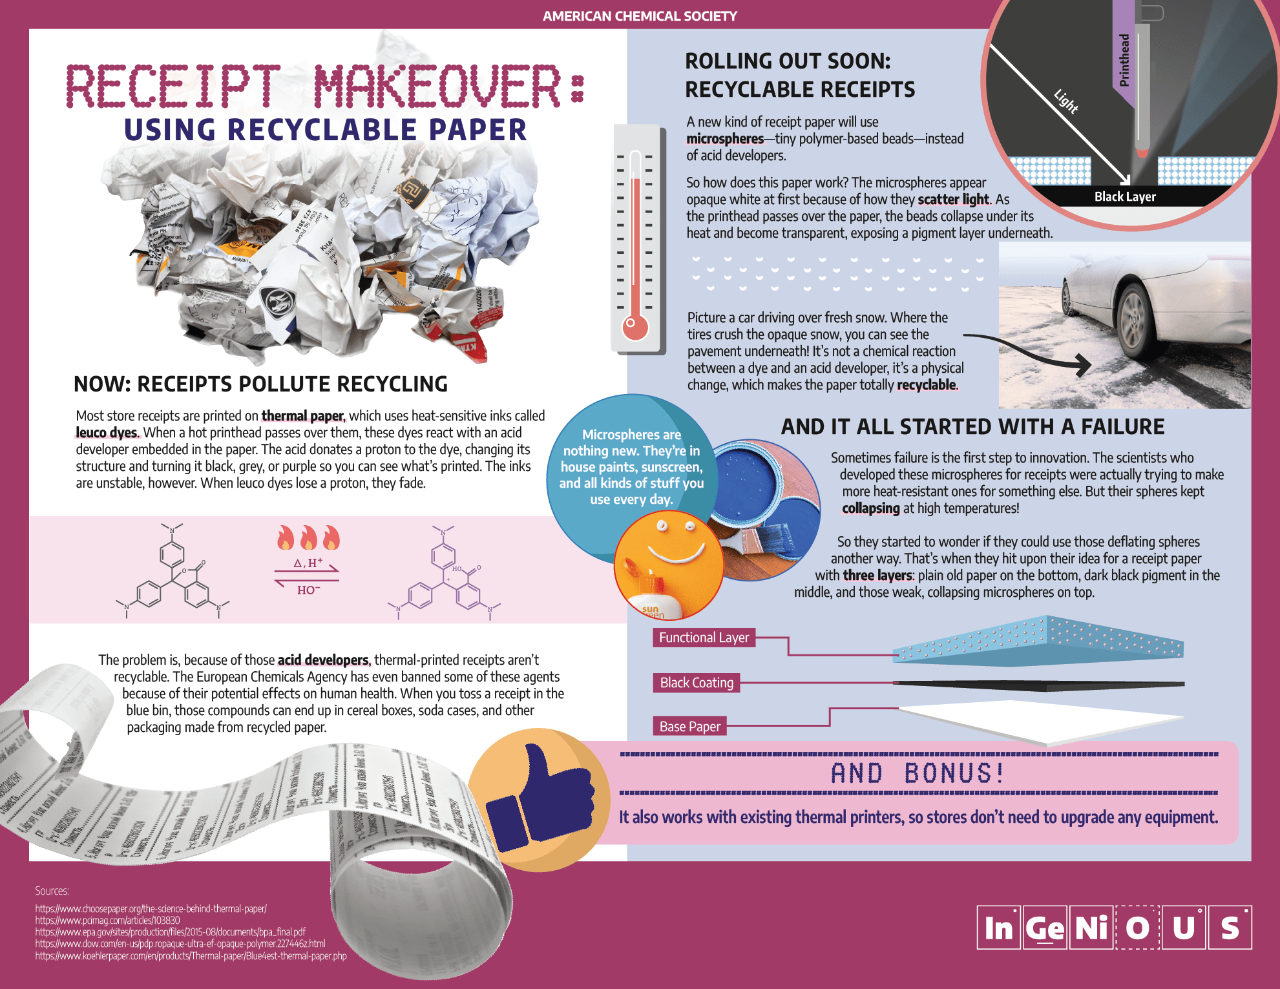 Receipt Makeover: Using Recyclable Paper: Infographic